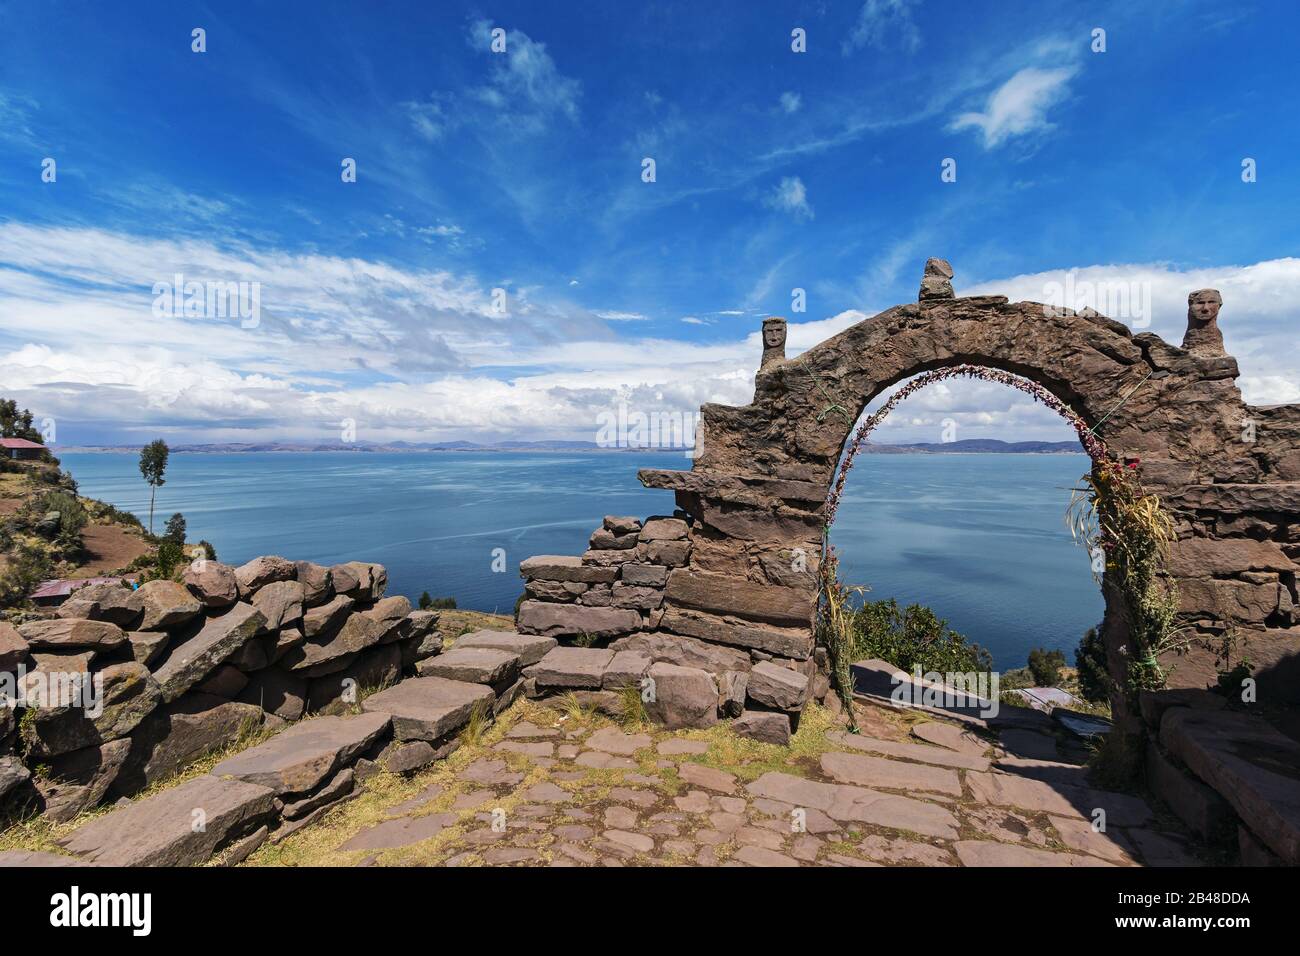 One of the arches of the Taquile Island located on Titicaca Lake, Perù Stock Photo